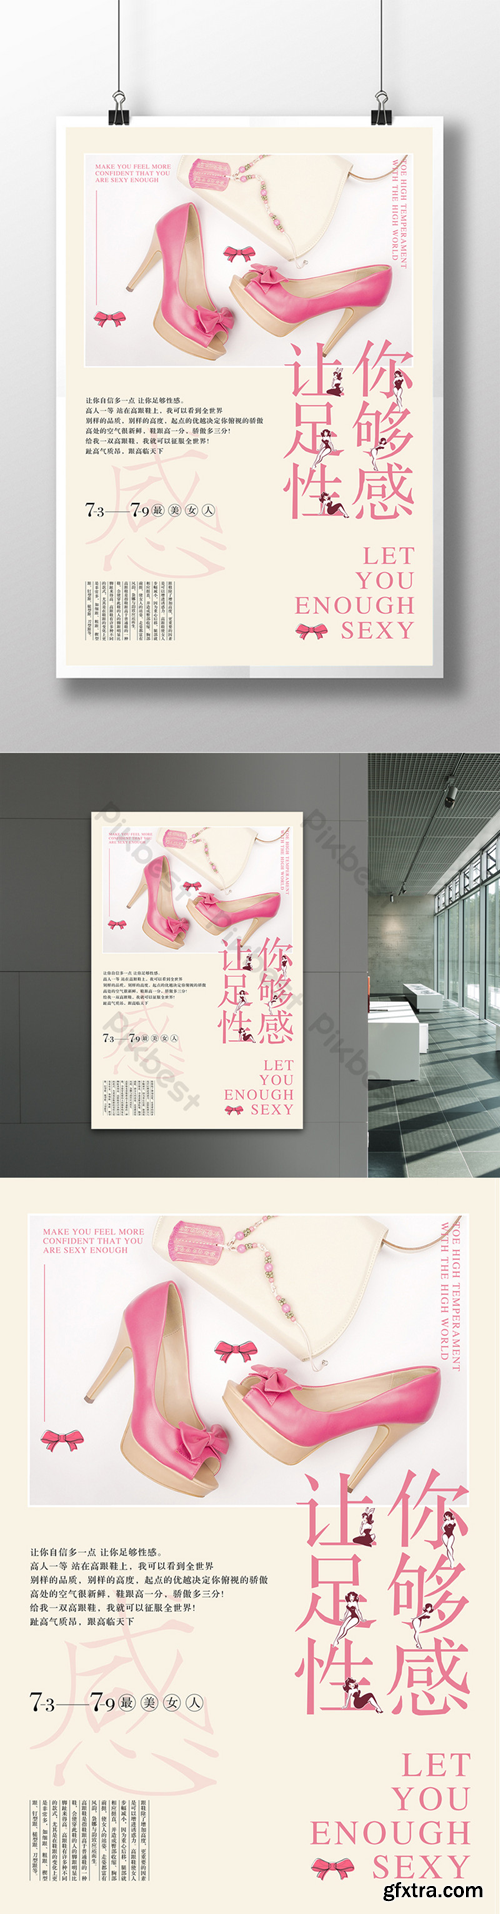 Enough sexy high heels poster Template PSD